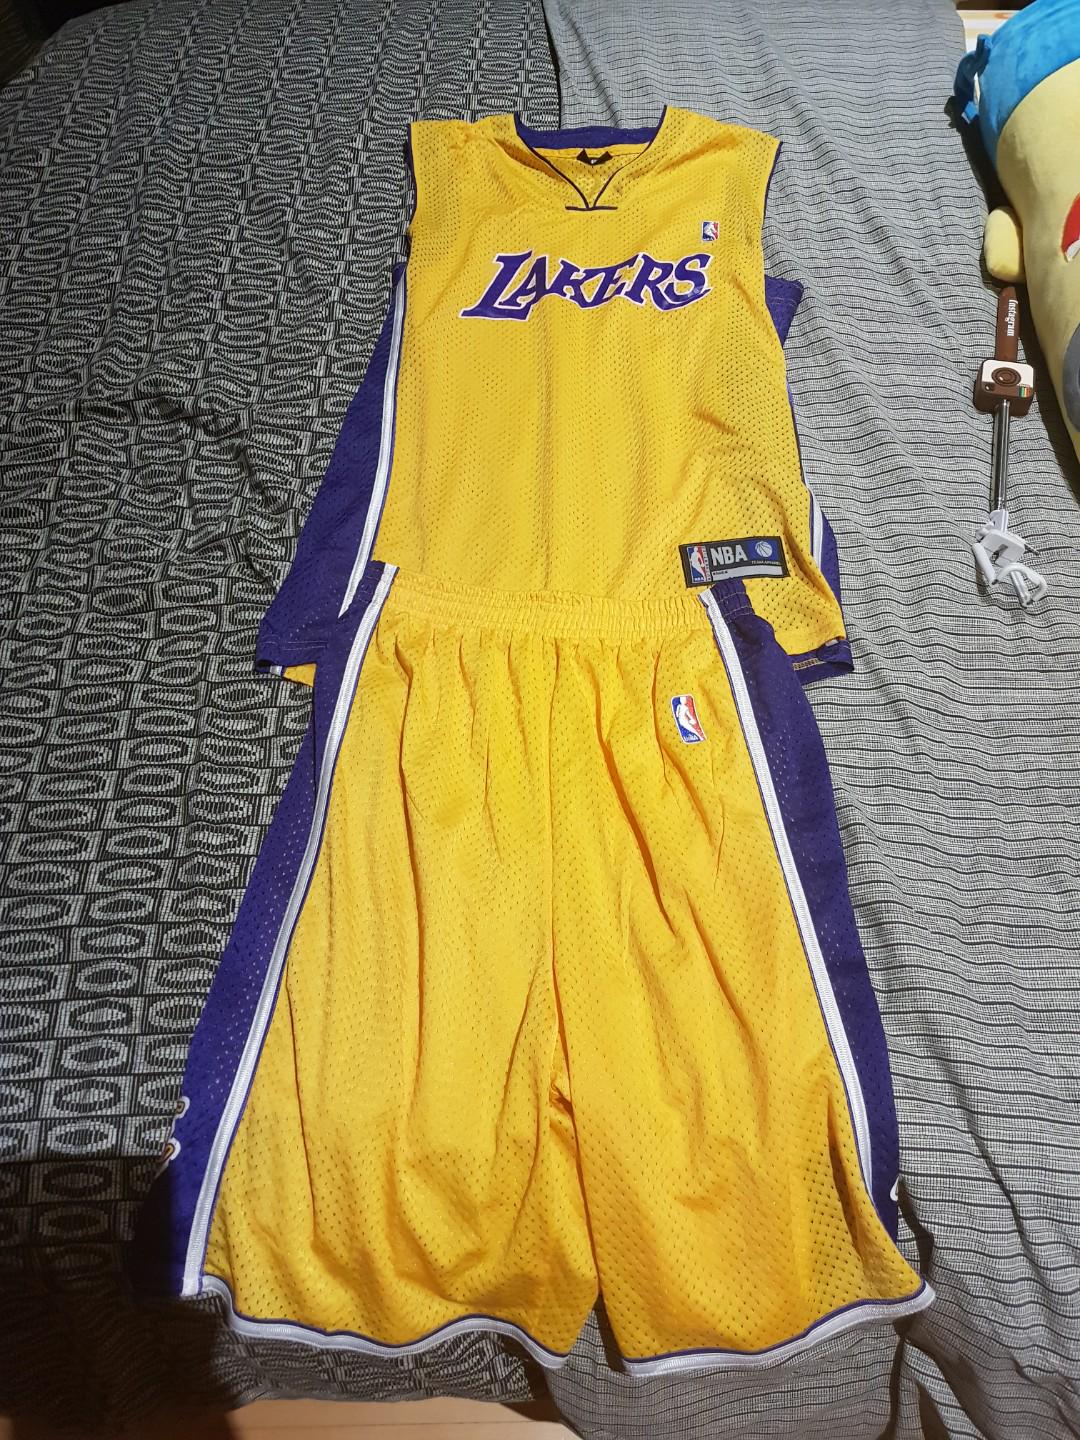 LA Lakers jersey with no number and 